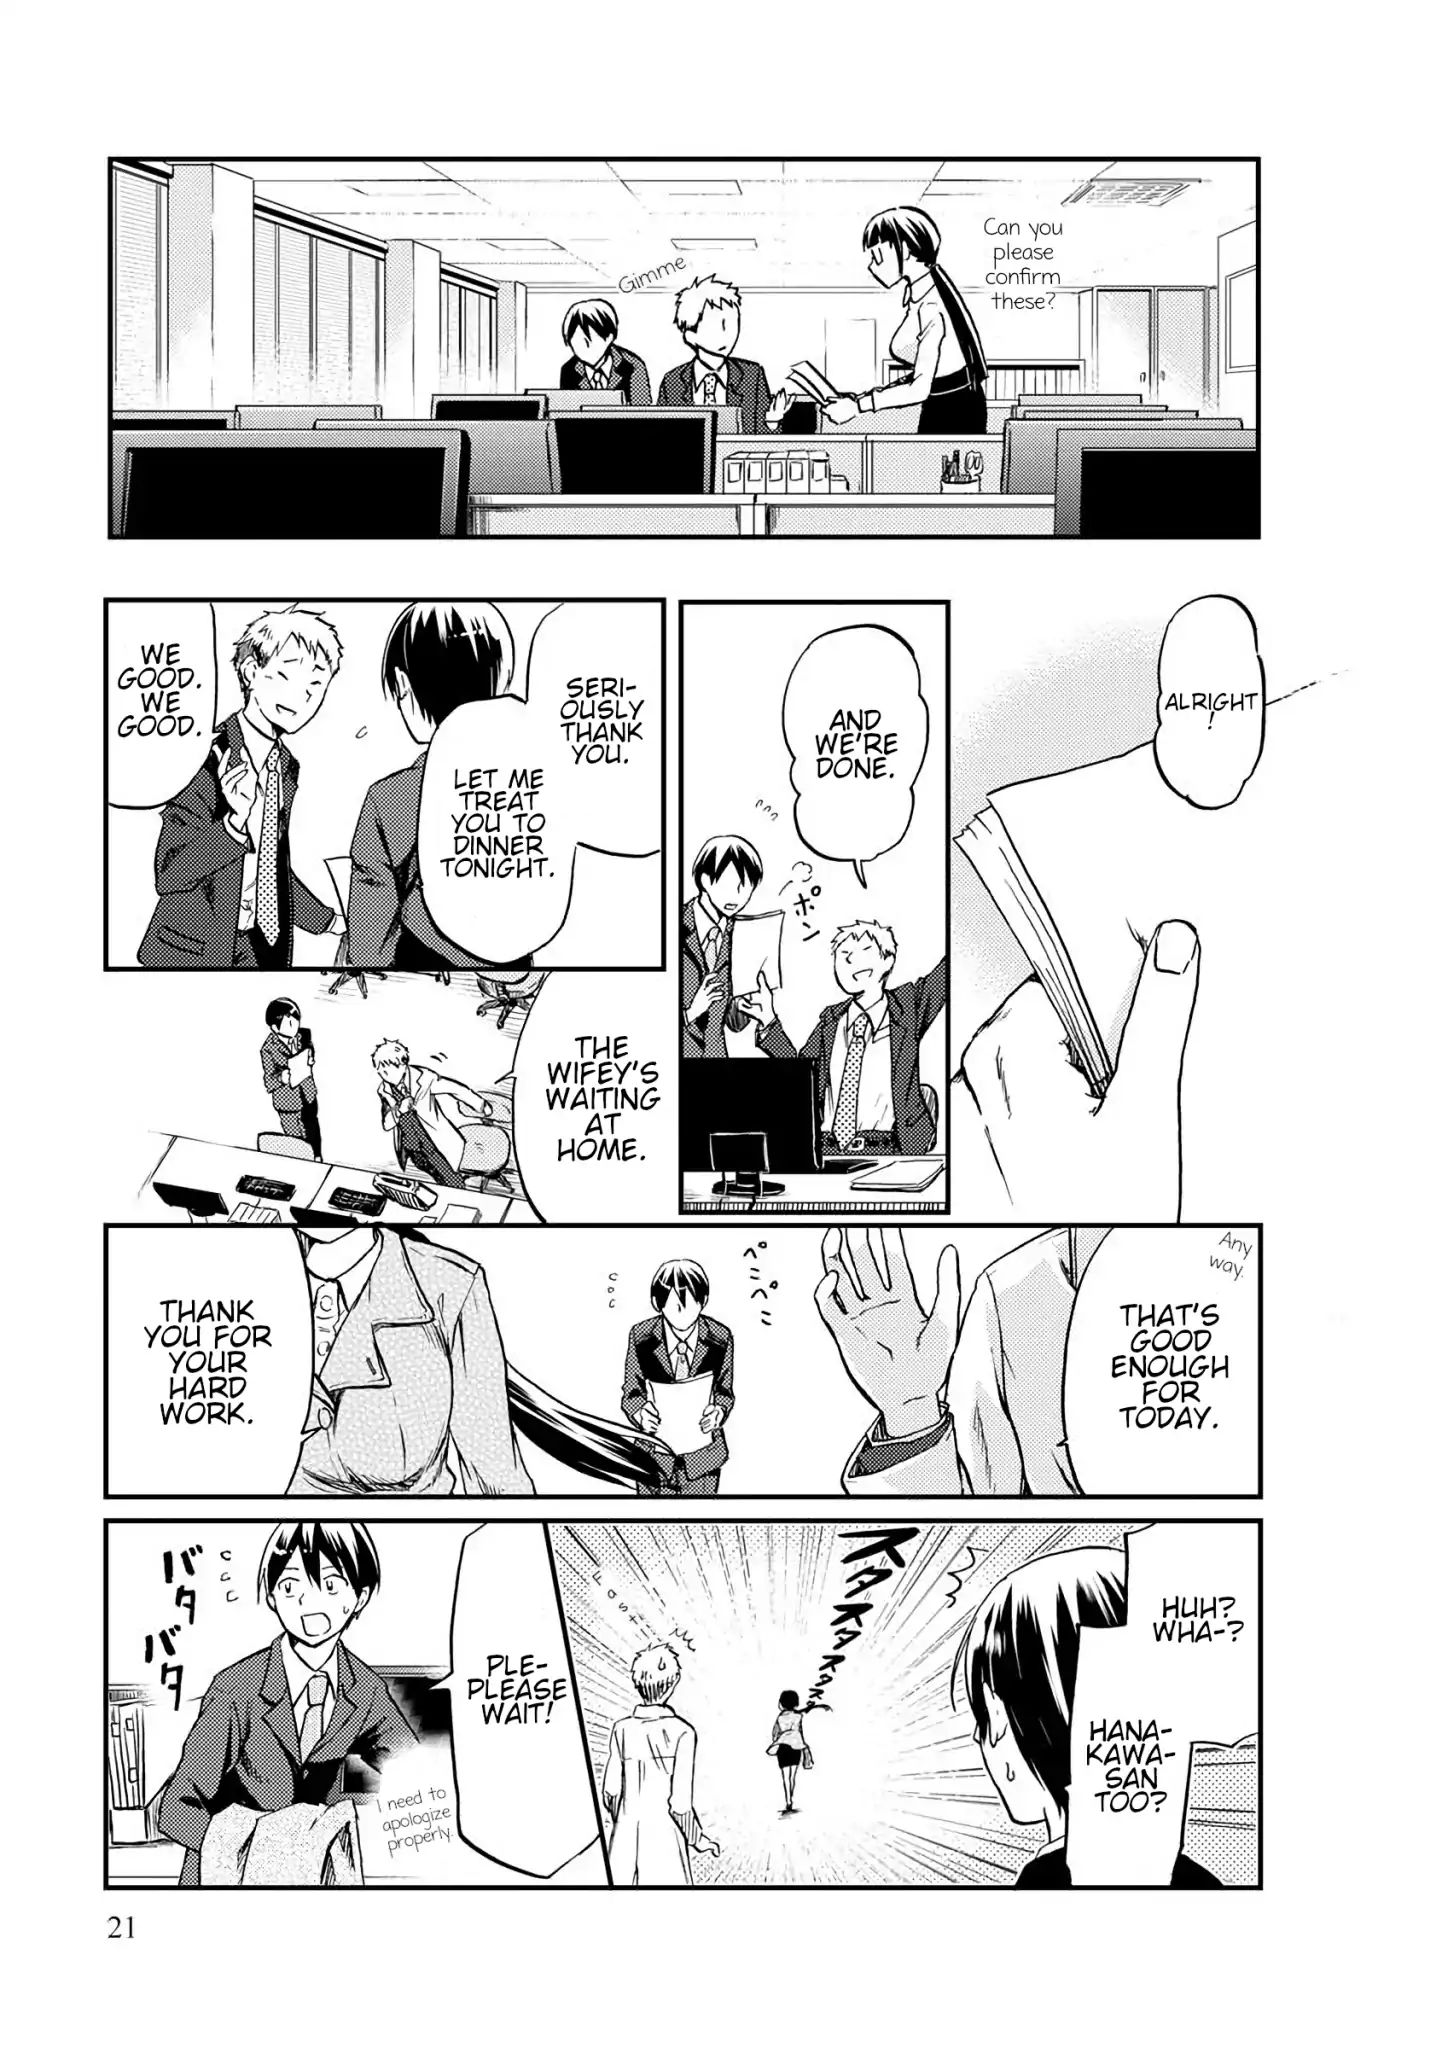 Harukawa-San Is Hungry Today Too. Vol.1 Chapter 3 - Picture 3